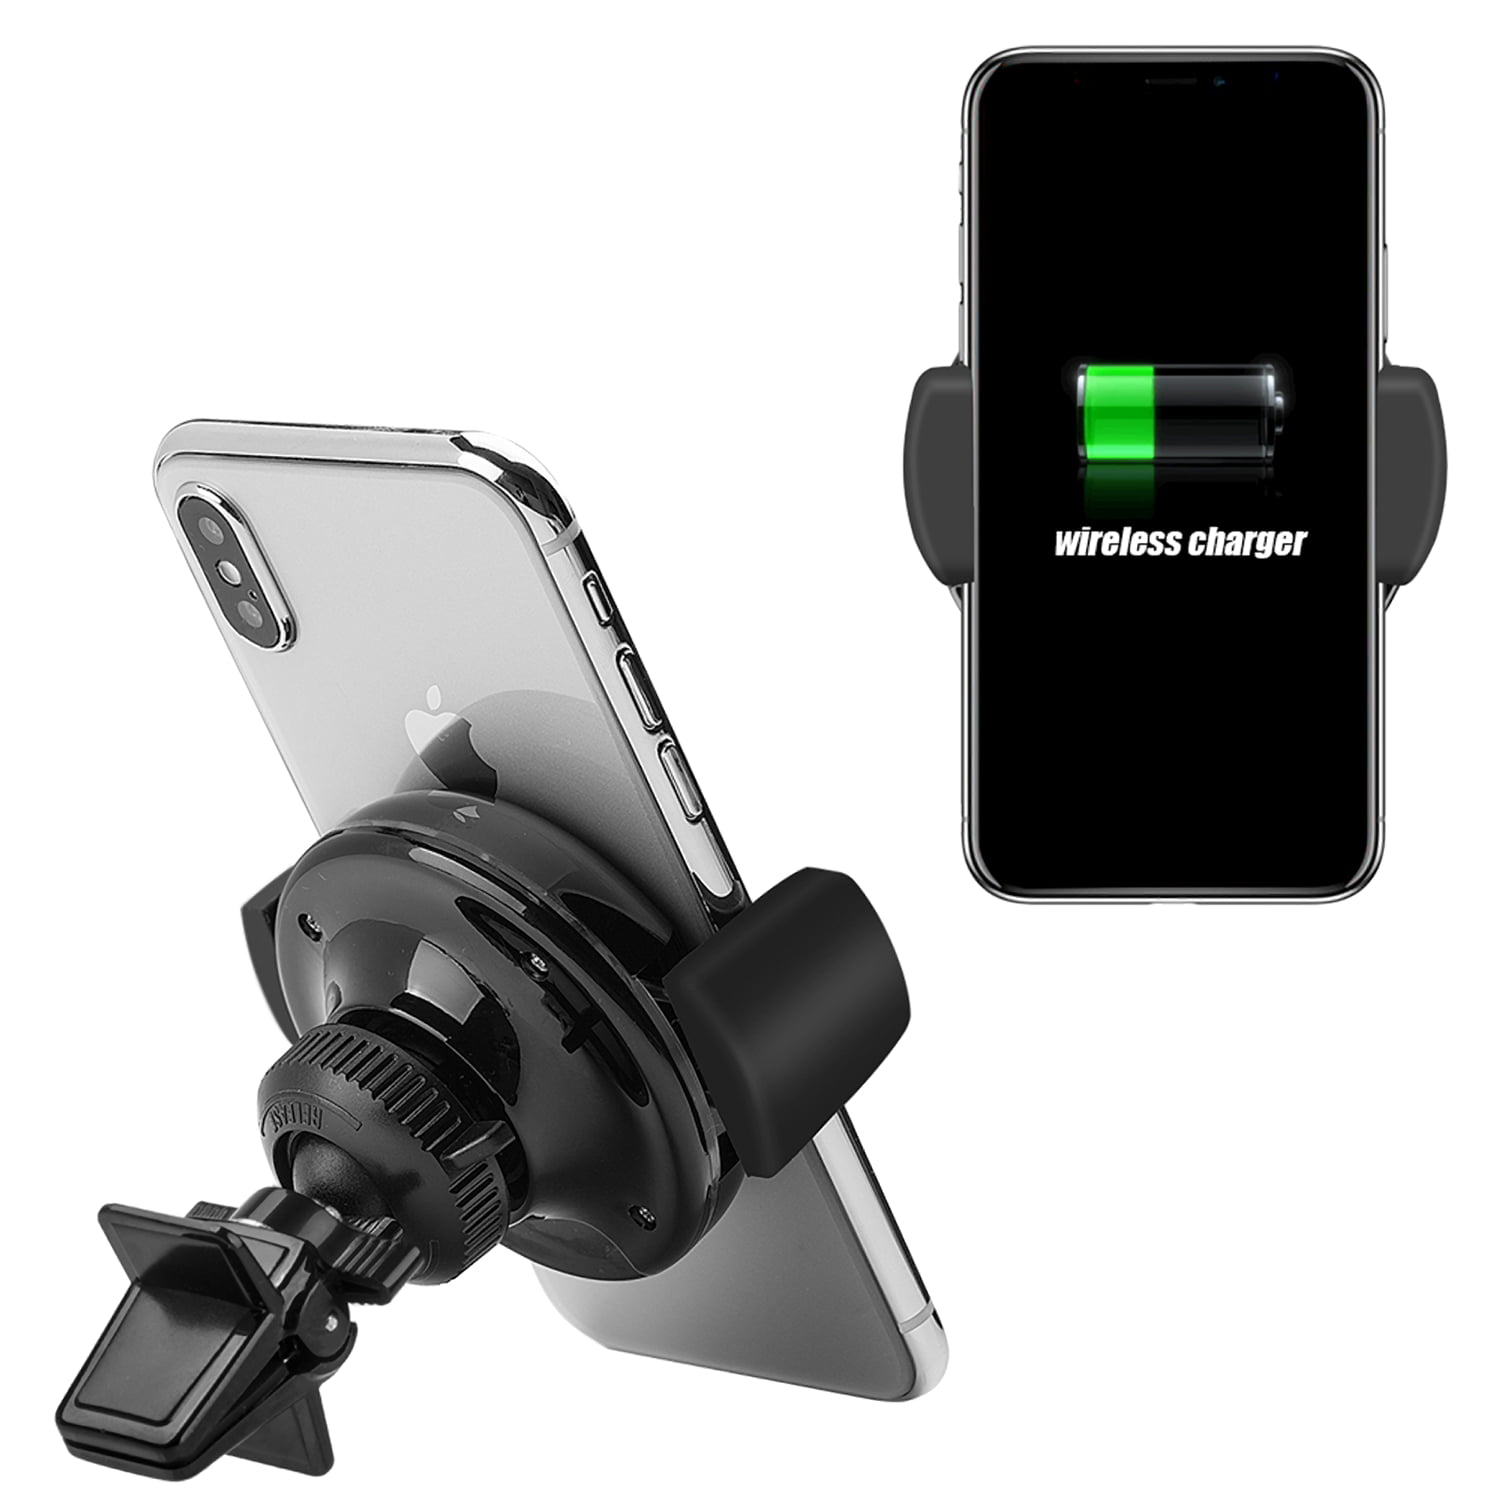 Wireless Car Charger Mount Qi Air Vent Holder with Retractable Cable Black Xiron 4350467778 Fast Wireless Charger for Samsung Galaxy Note 9 S8 Plus S7 Edge Apple iPhone XR iPhone 8 Plus All Qi-Enabled Devices 